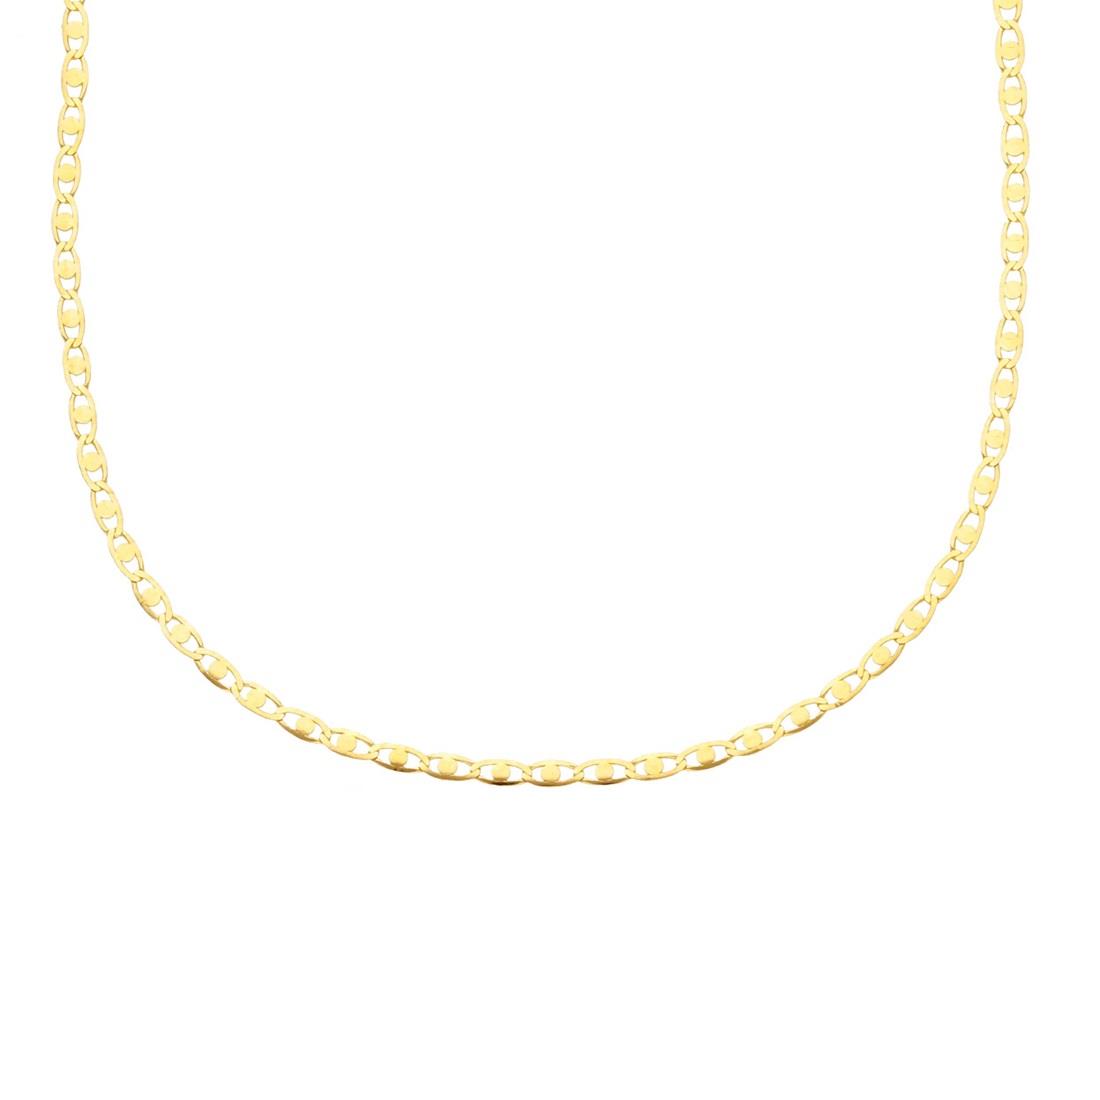 Men's flat link gold necklace - ORO&CO